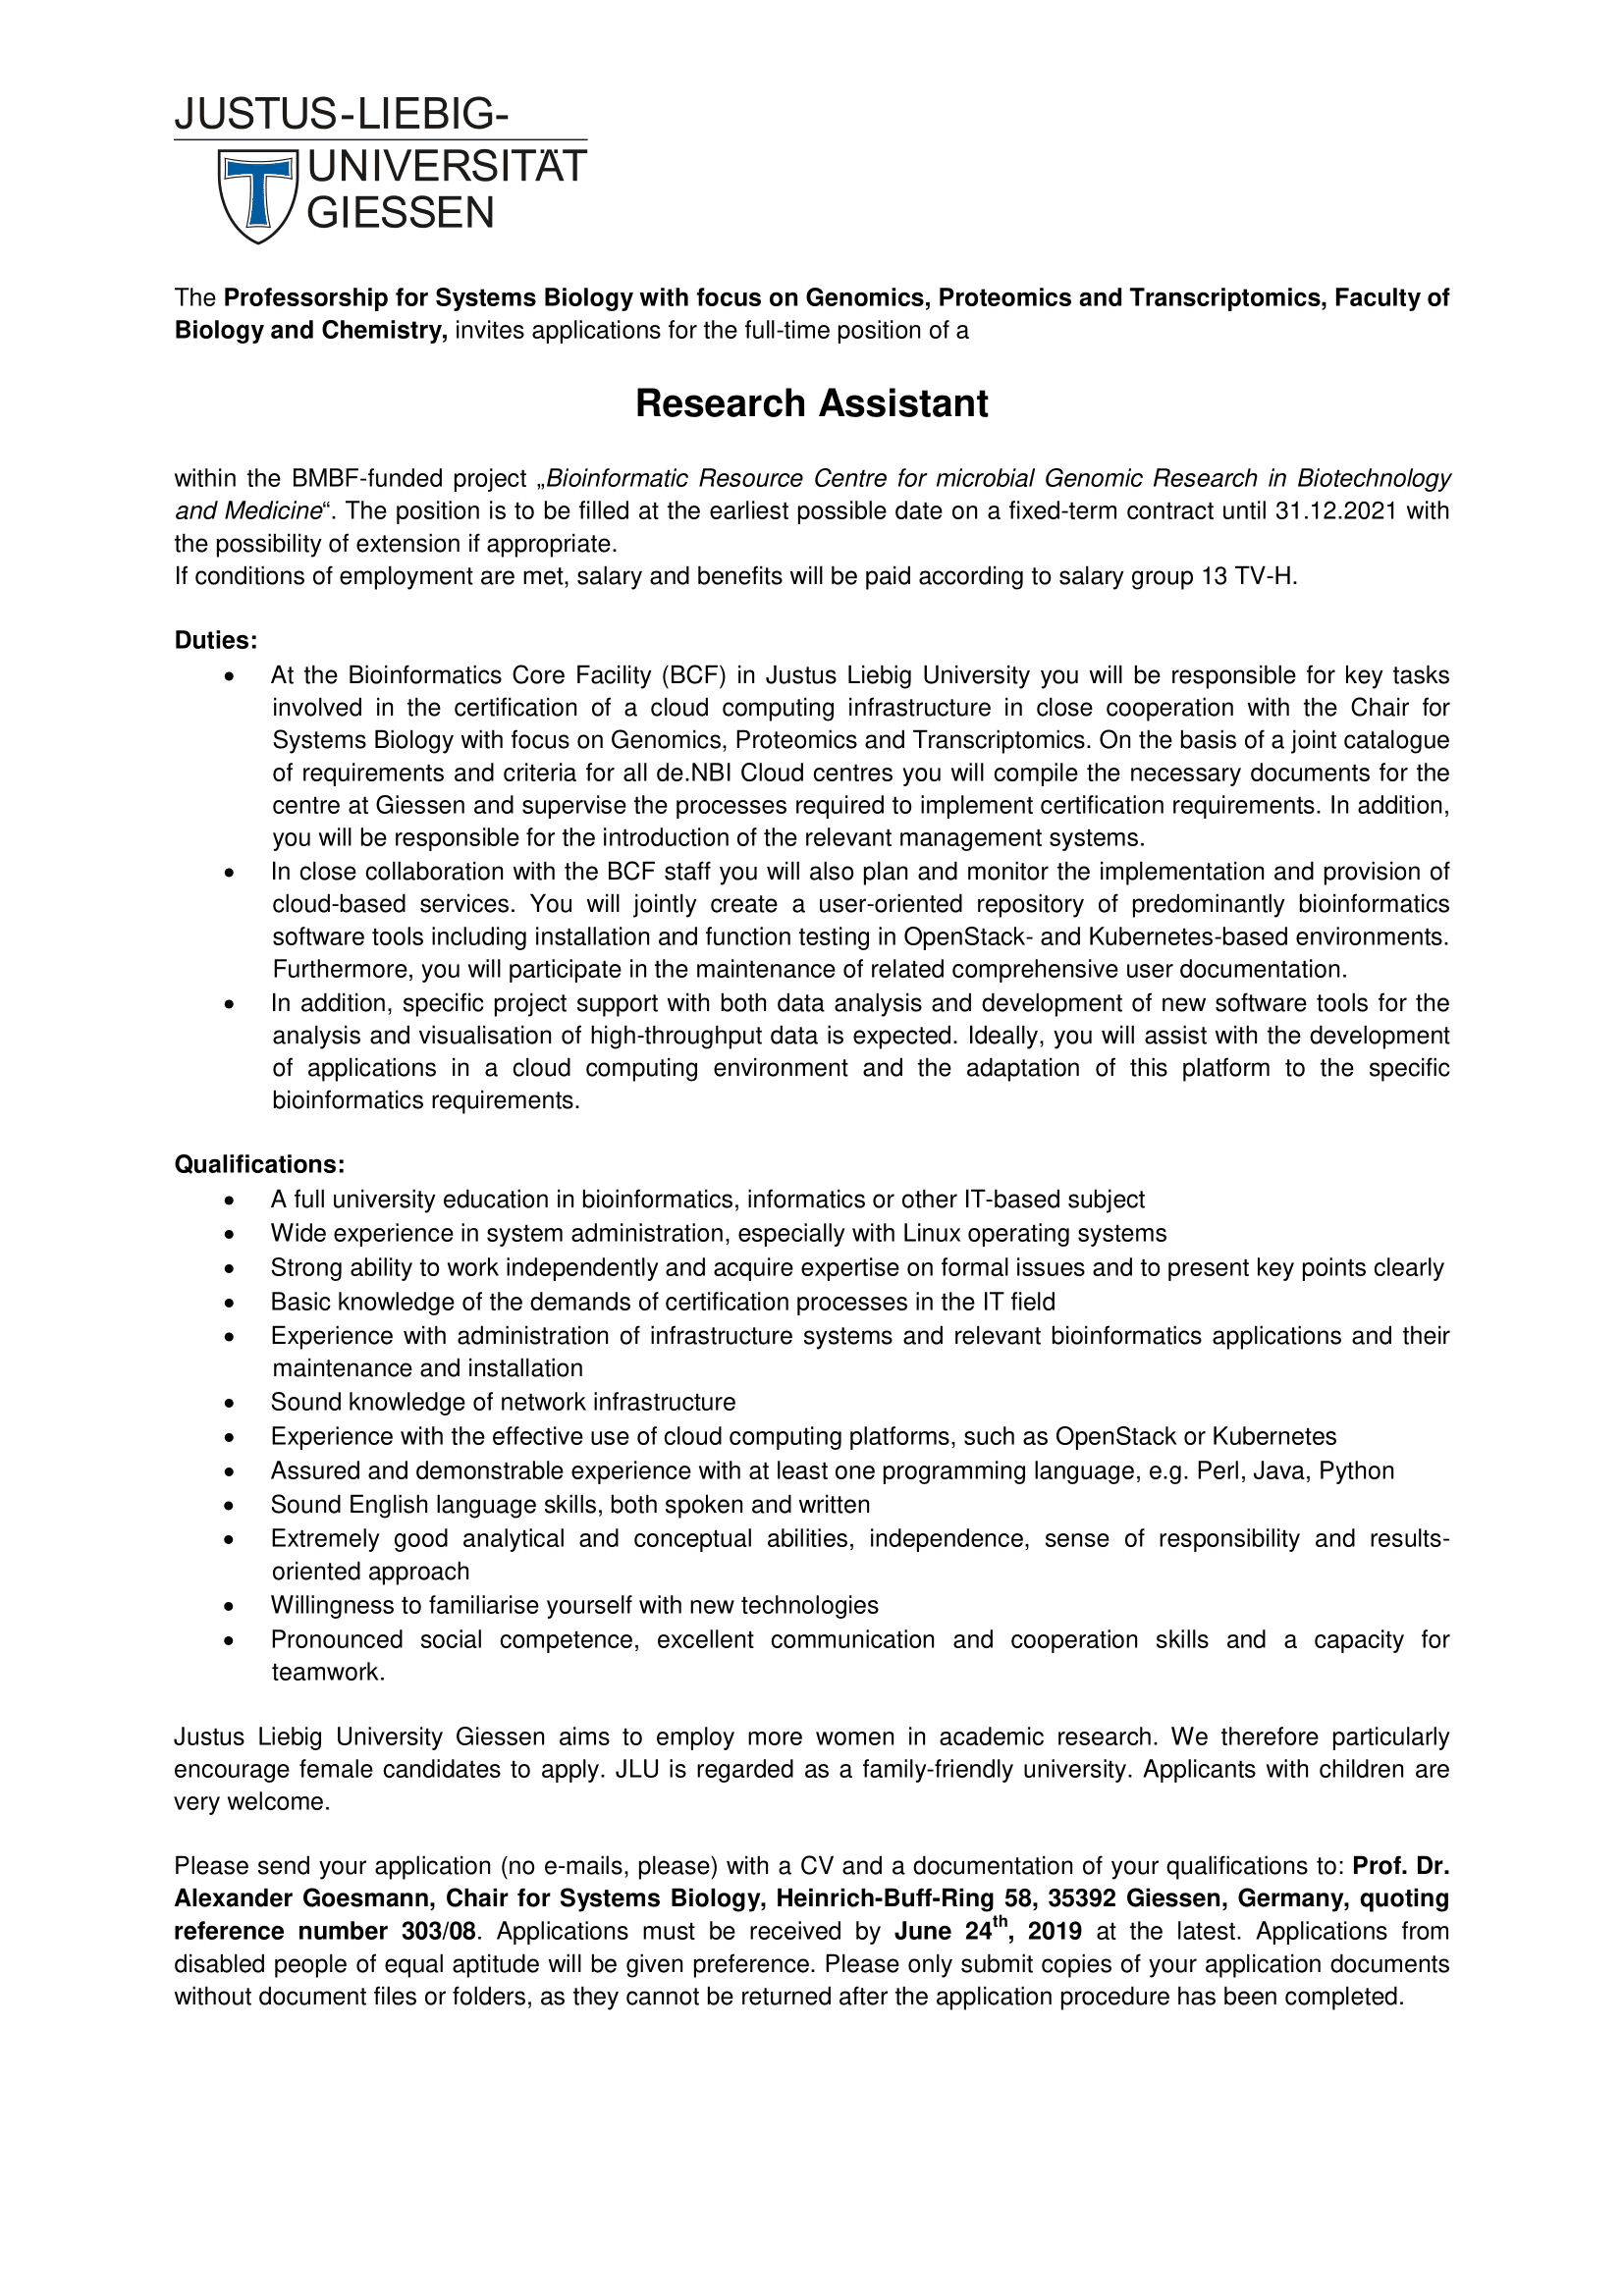 Research Assistant 303 08 1